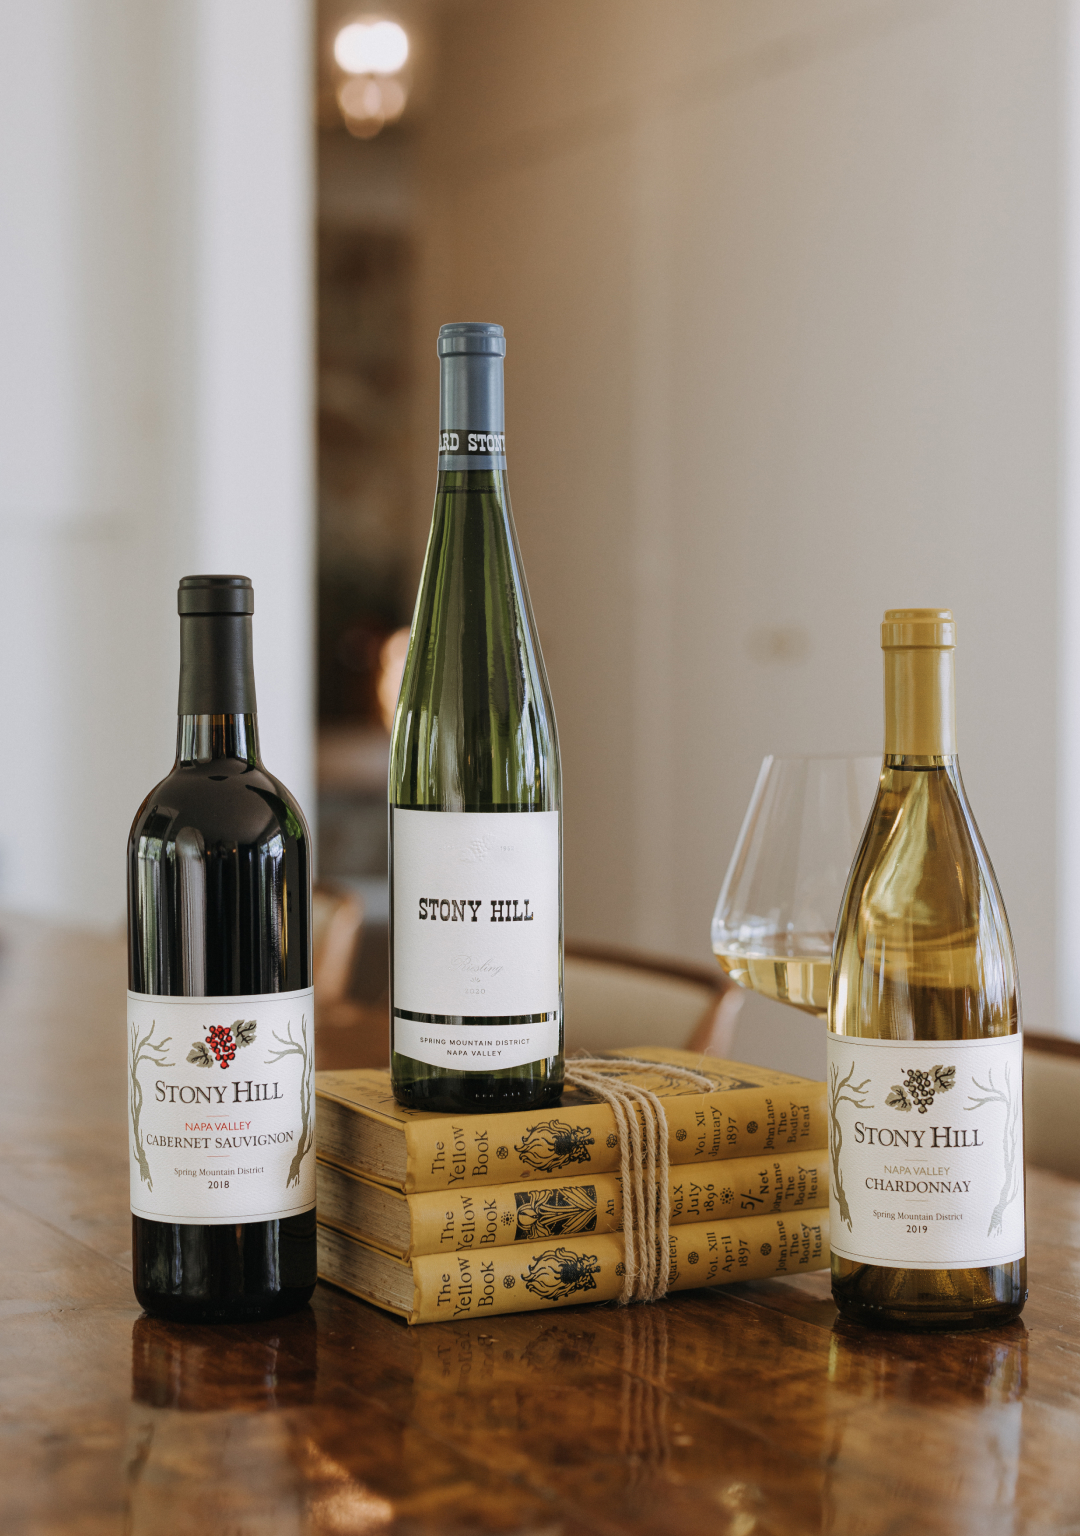 Three bottles of Stony Hill wine on a table inside the Stony Hill residence.